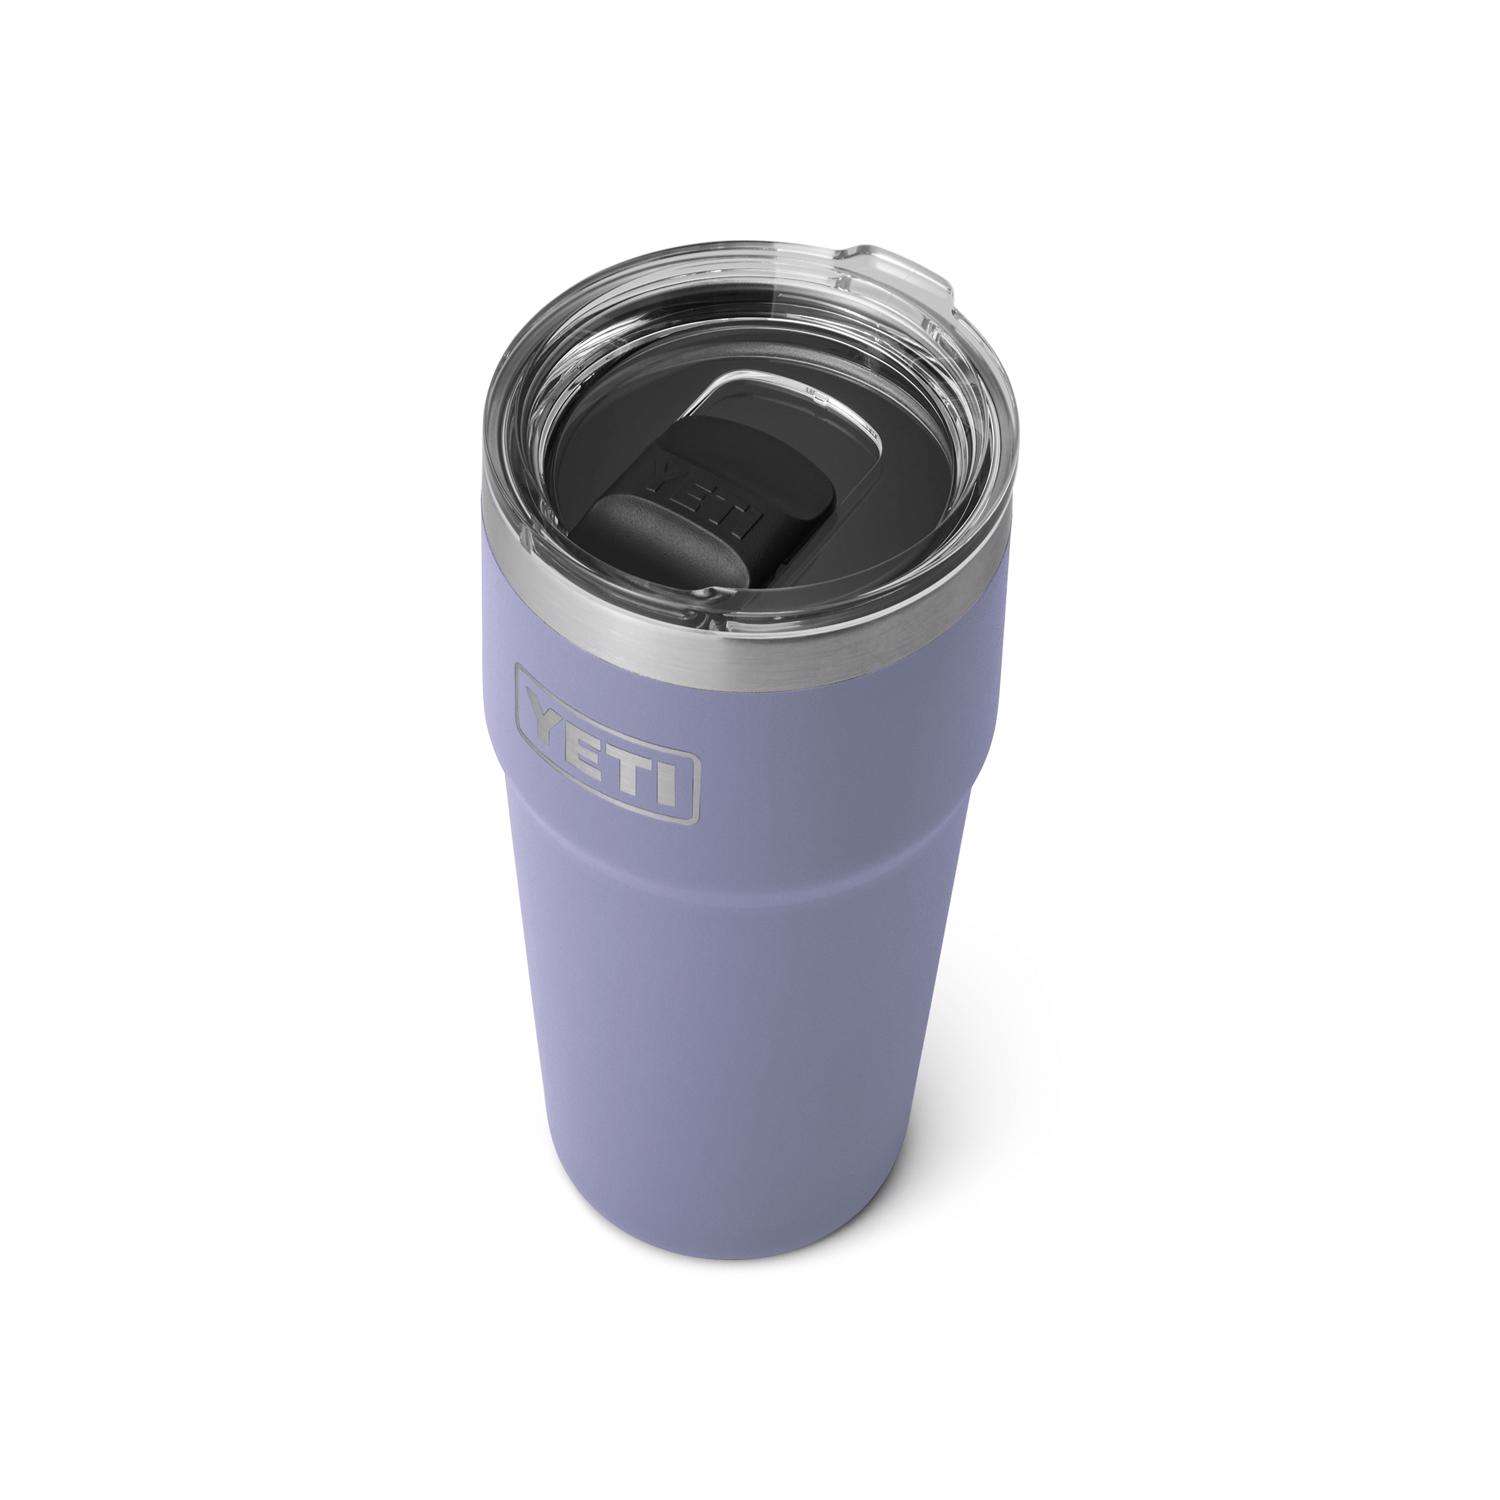 Take It To Go with Lids Reusable Plastic Travel Cups Mugs, Hot Cold Drinks,  8-ct Set (To Go 2),16 ounces